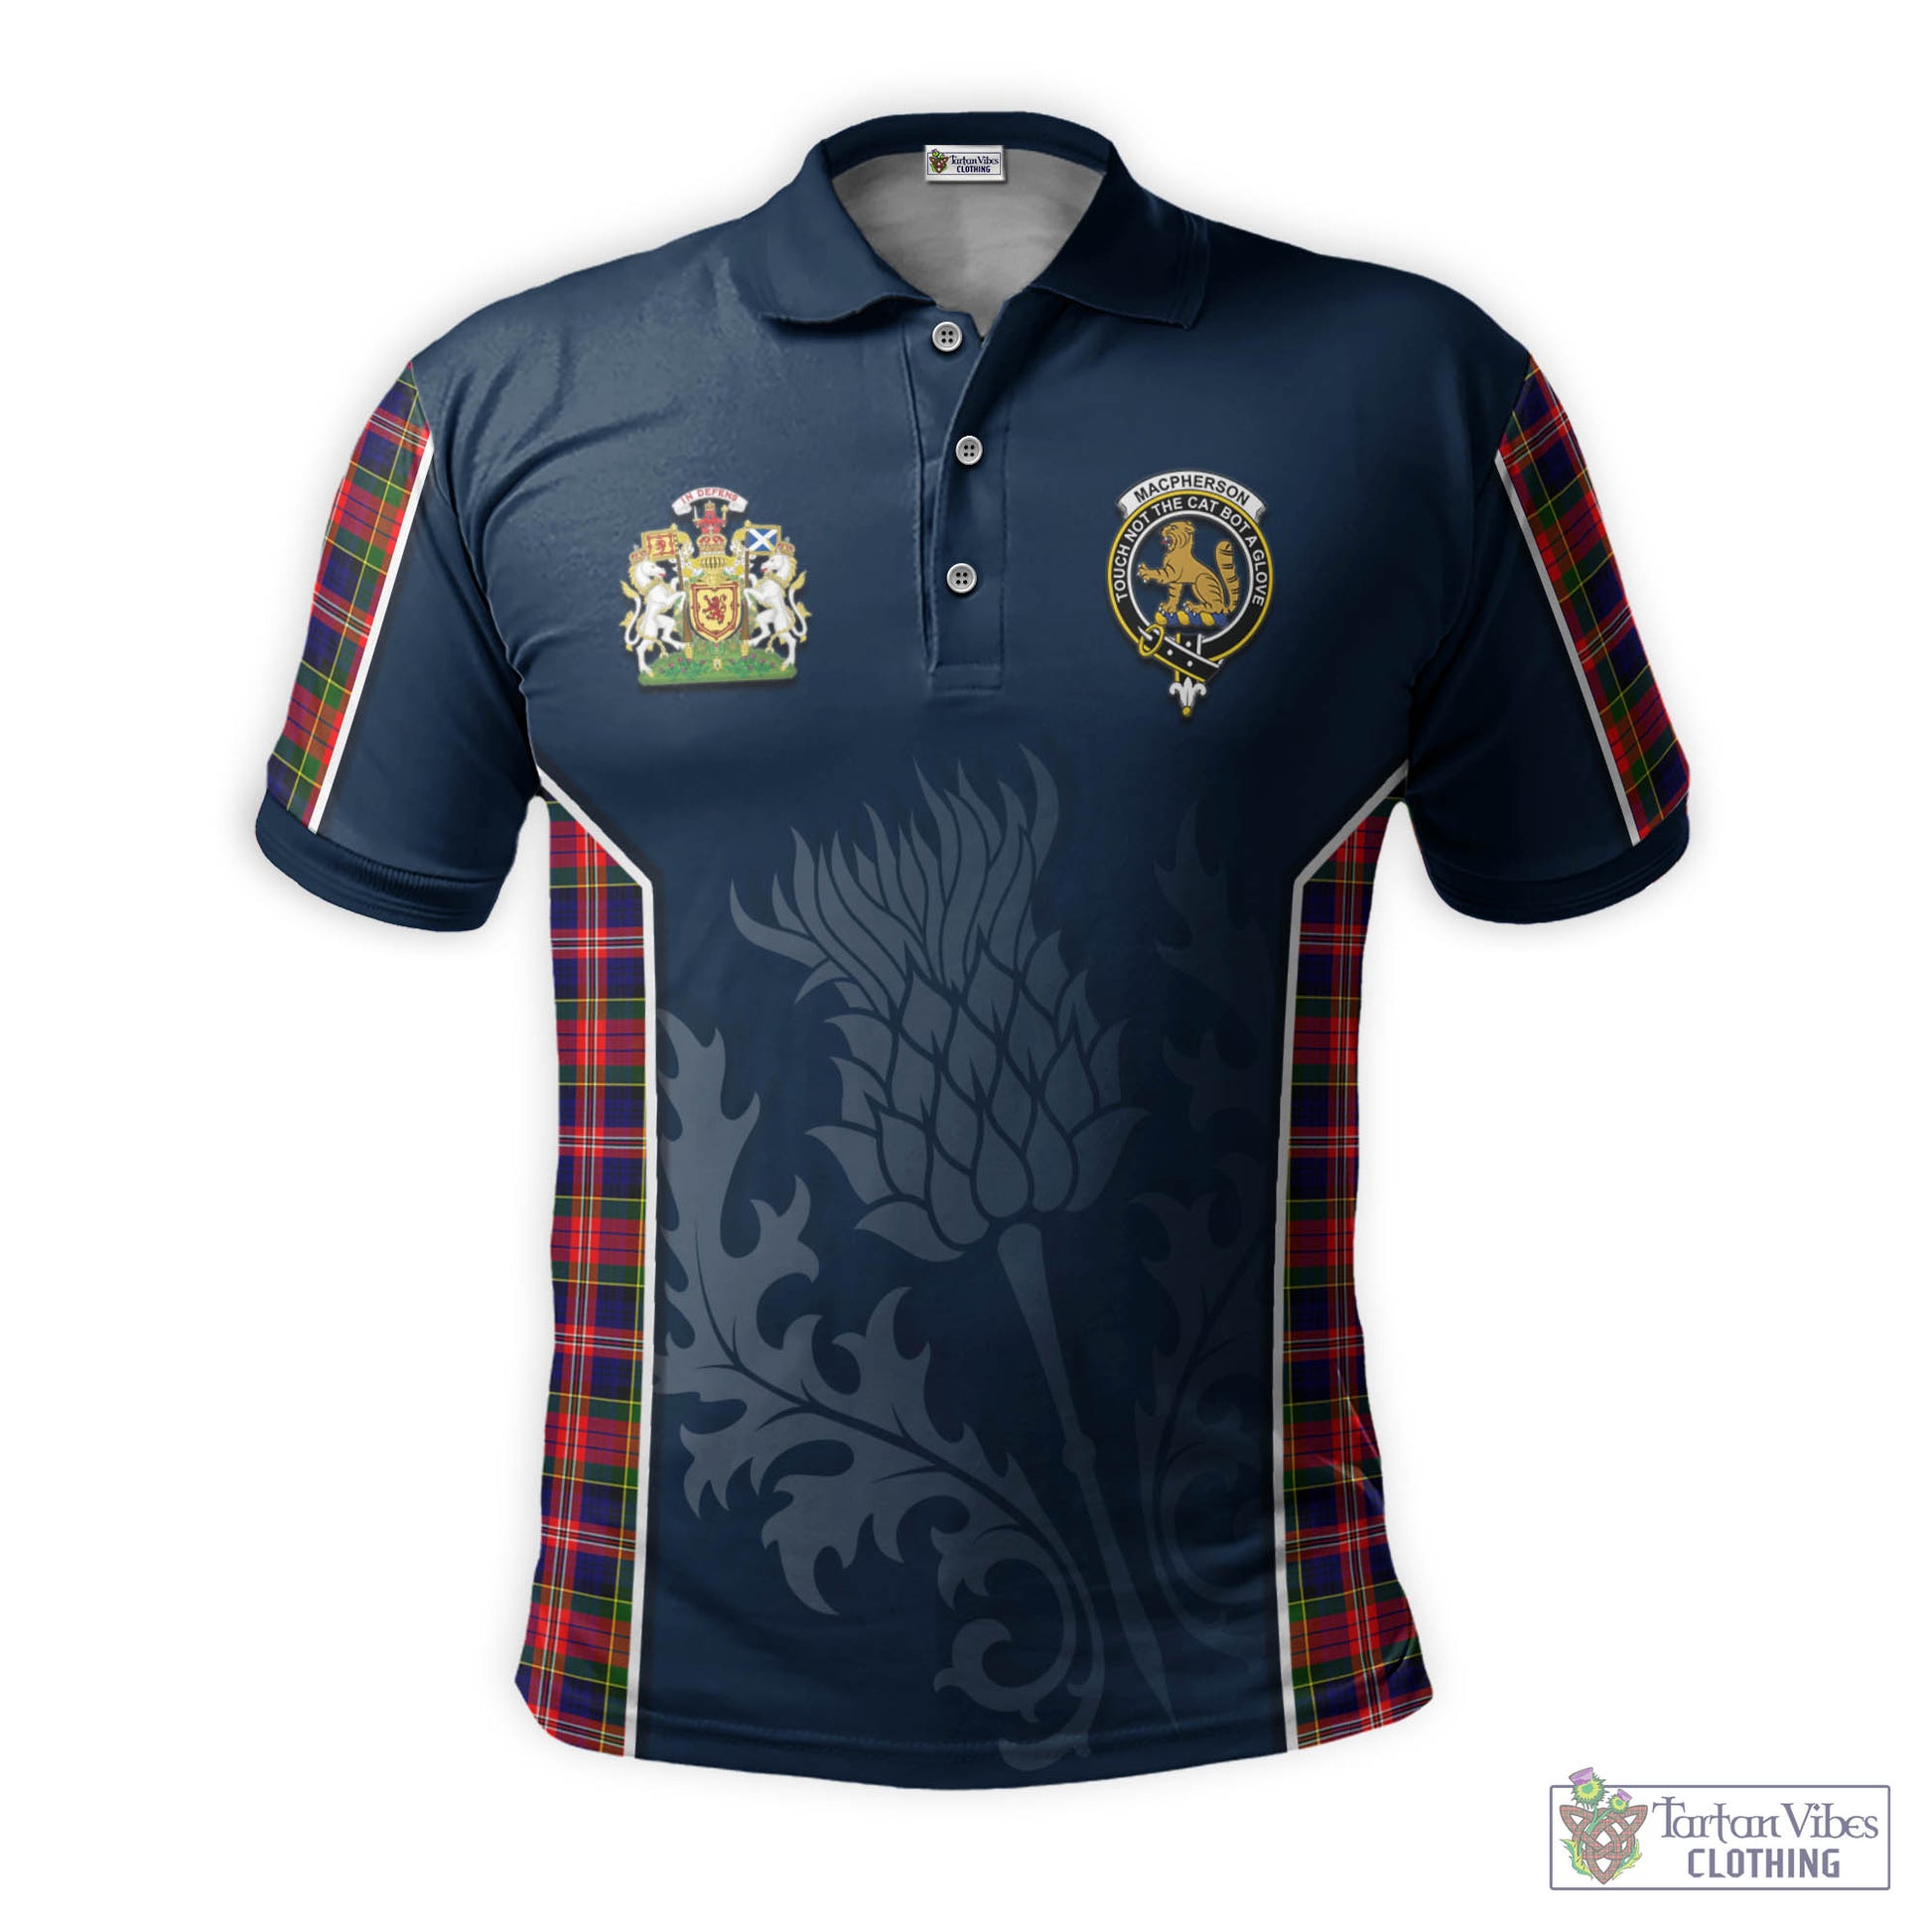 Tartan Vibes Clothing MacPherson Modern Tartan Men's Polo Shirt with Family Crest and Scottish Thistle Vibes Sport Style